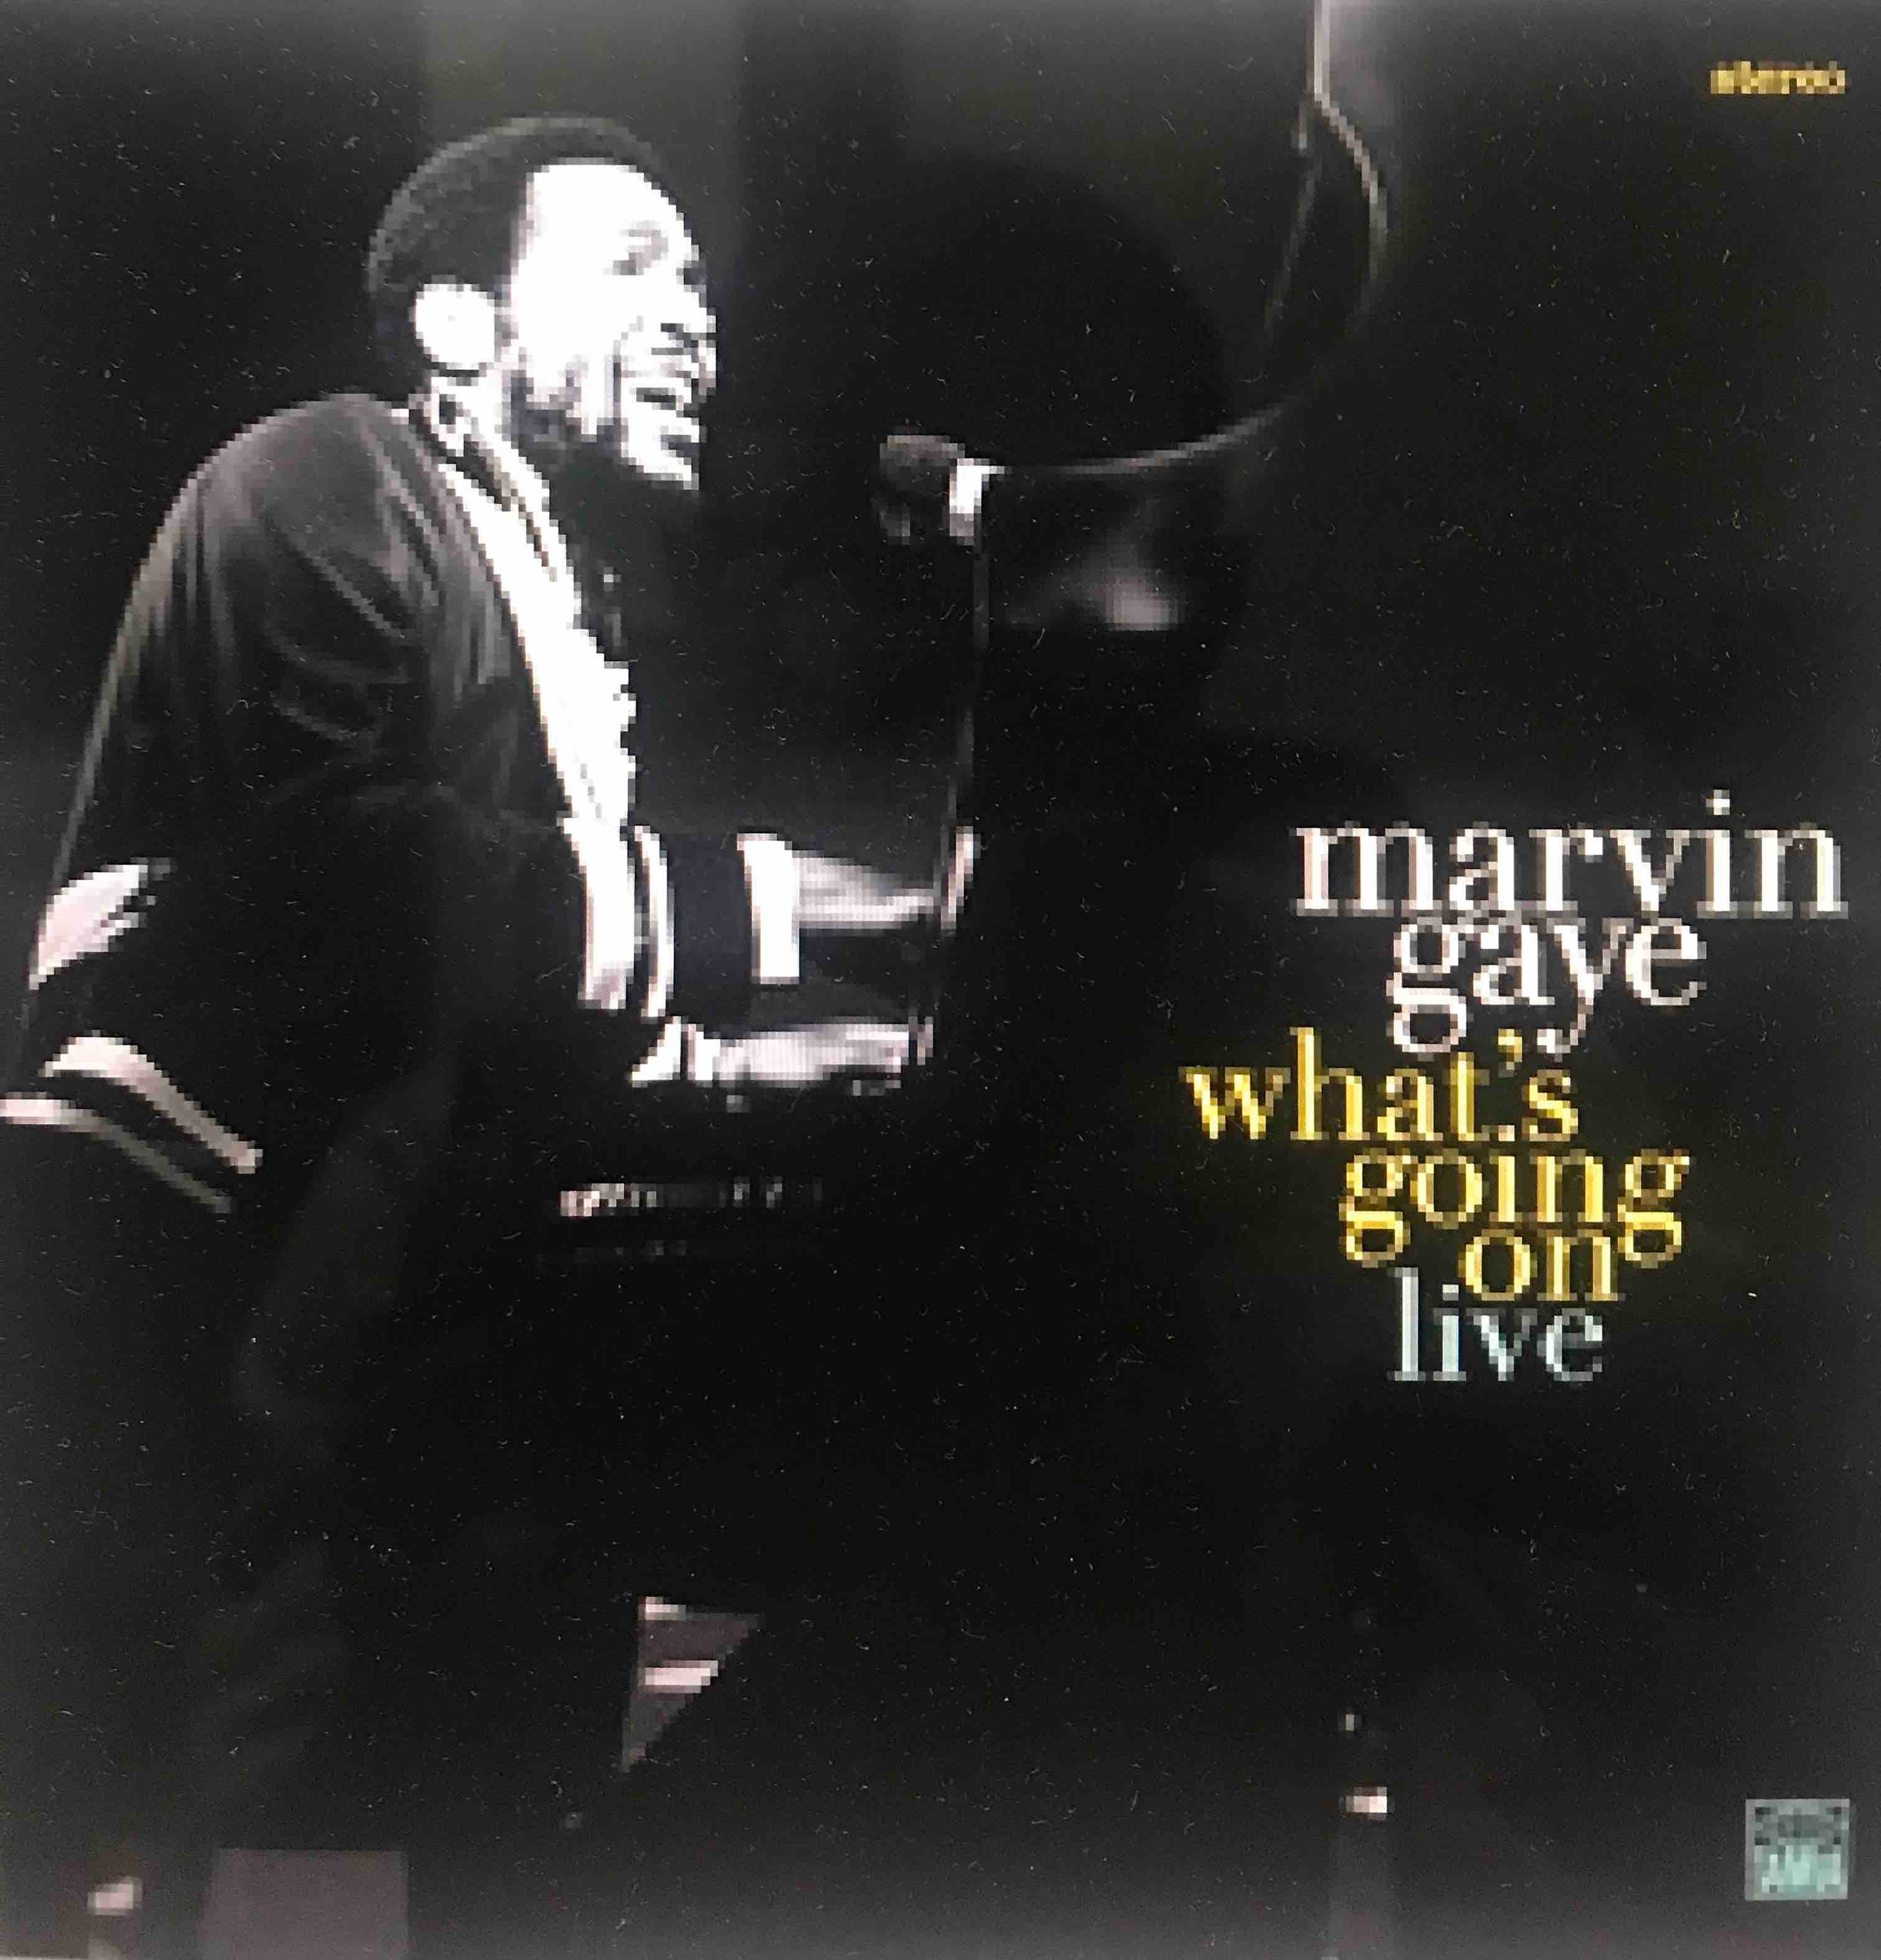 Marvin Gaye – What's Going On Live